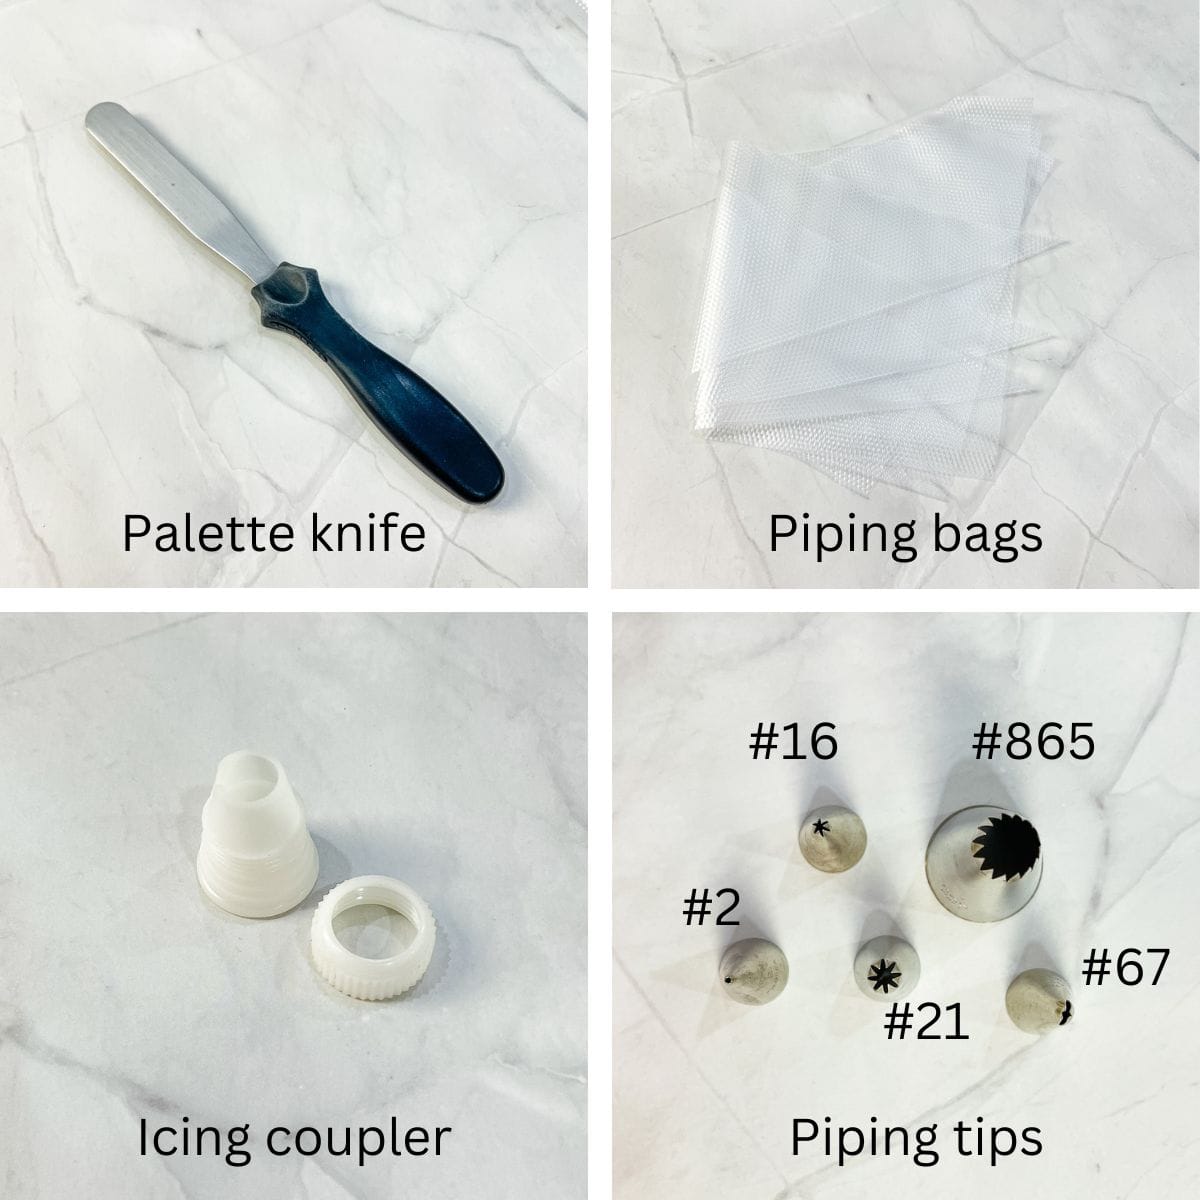 A poster of 4 images showing a palette knife, piping bags, icing coupler set and 5 piping tips.